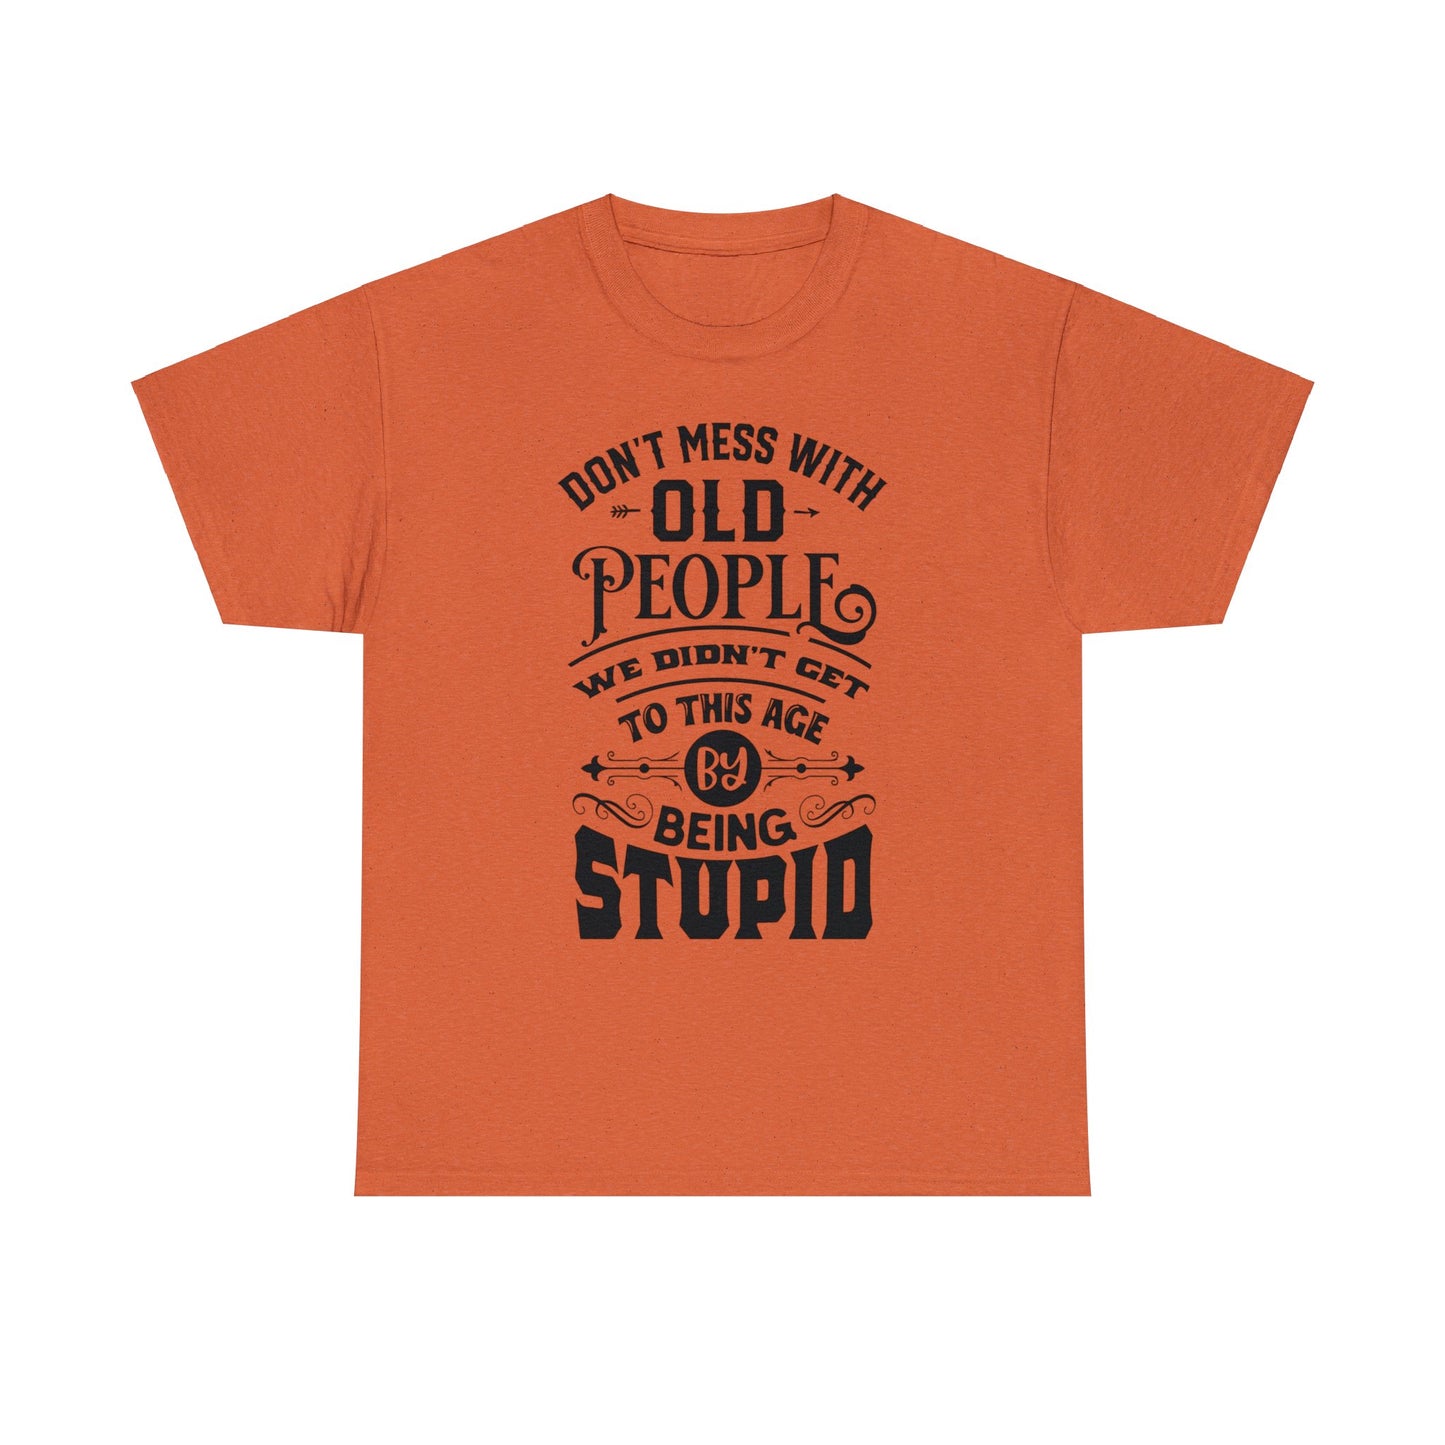 Old People T-Shirt For Funny Aging T Shirt For Getting Older TShirt For Birthday Gift